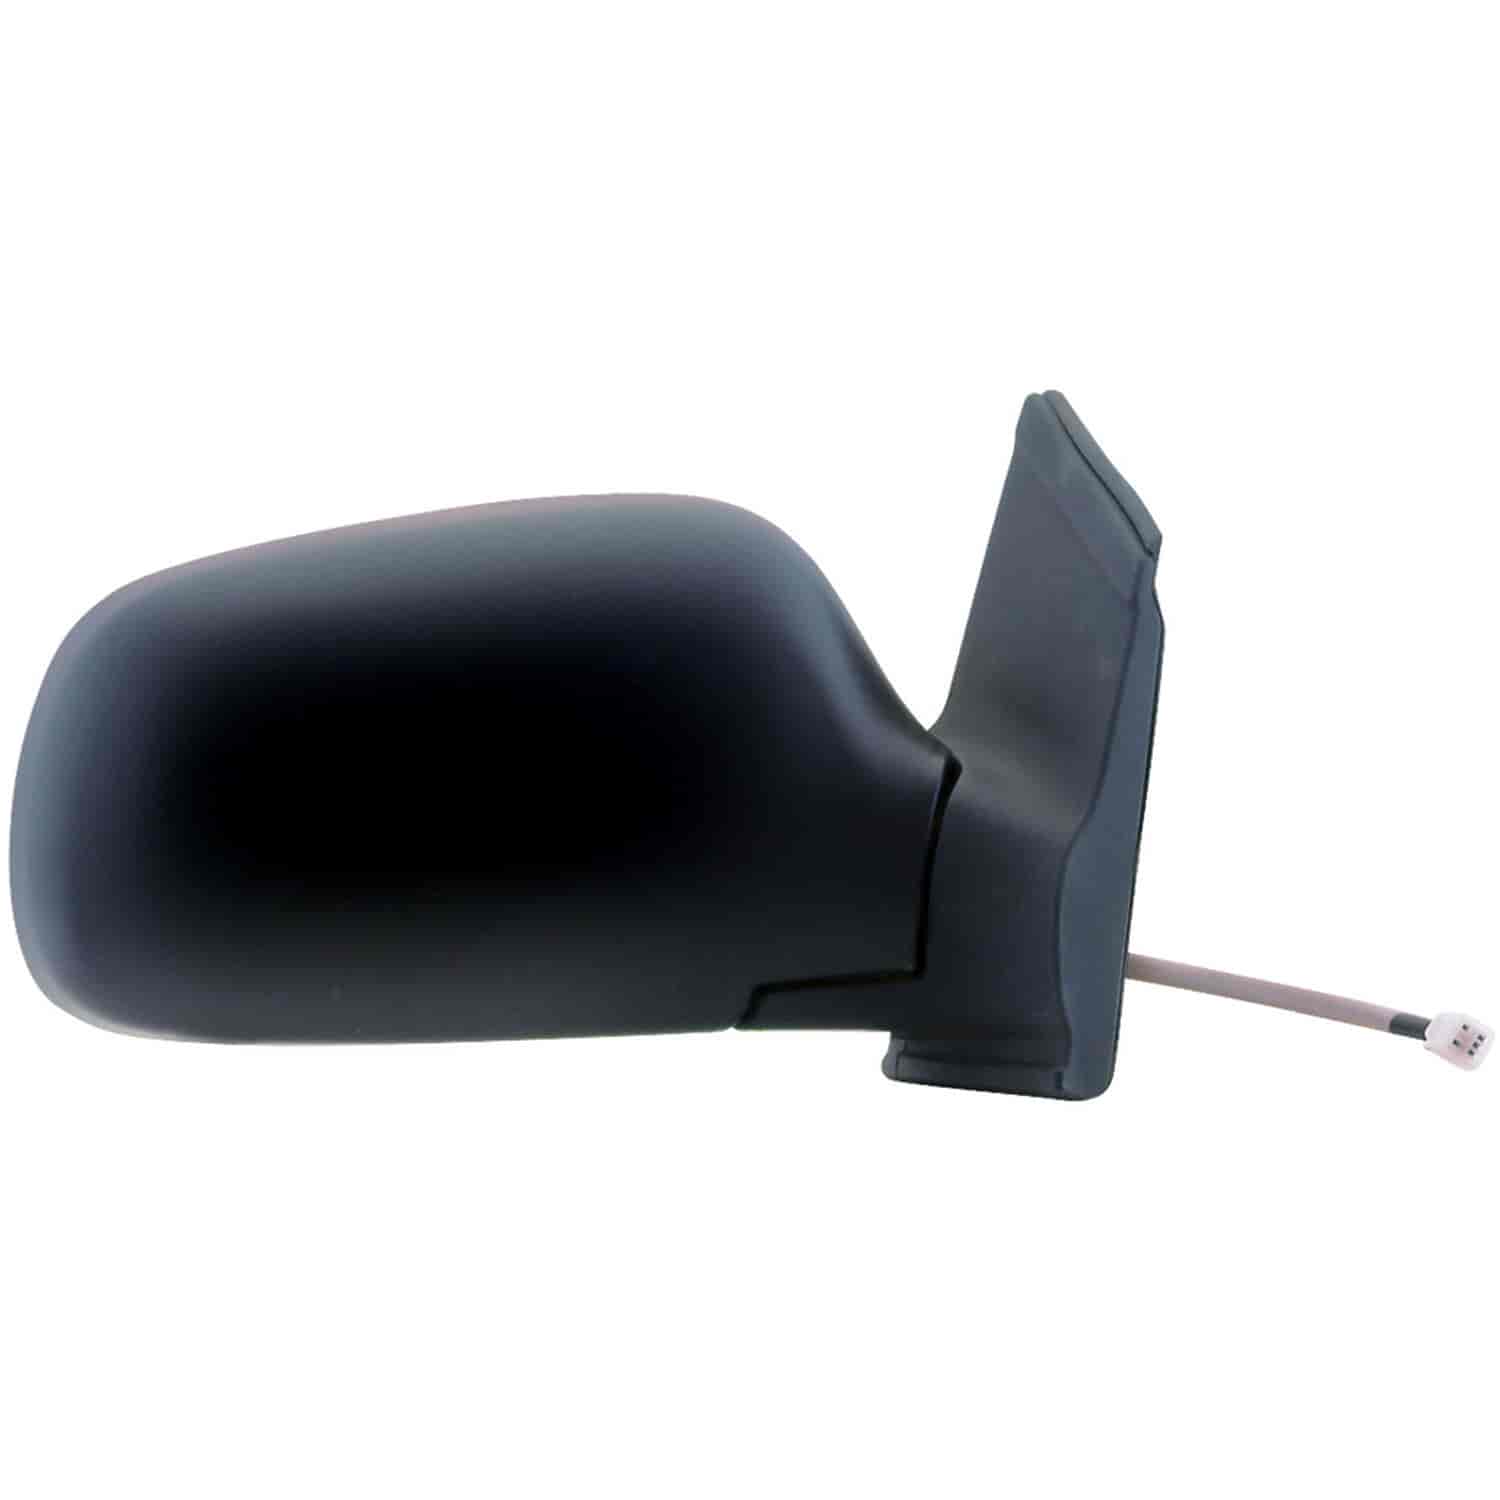 OEM Style Replacement mirror for 98-03 Toyota Sienna passenger side mirror tested to fit and functio